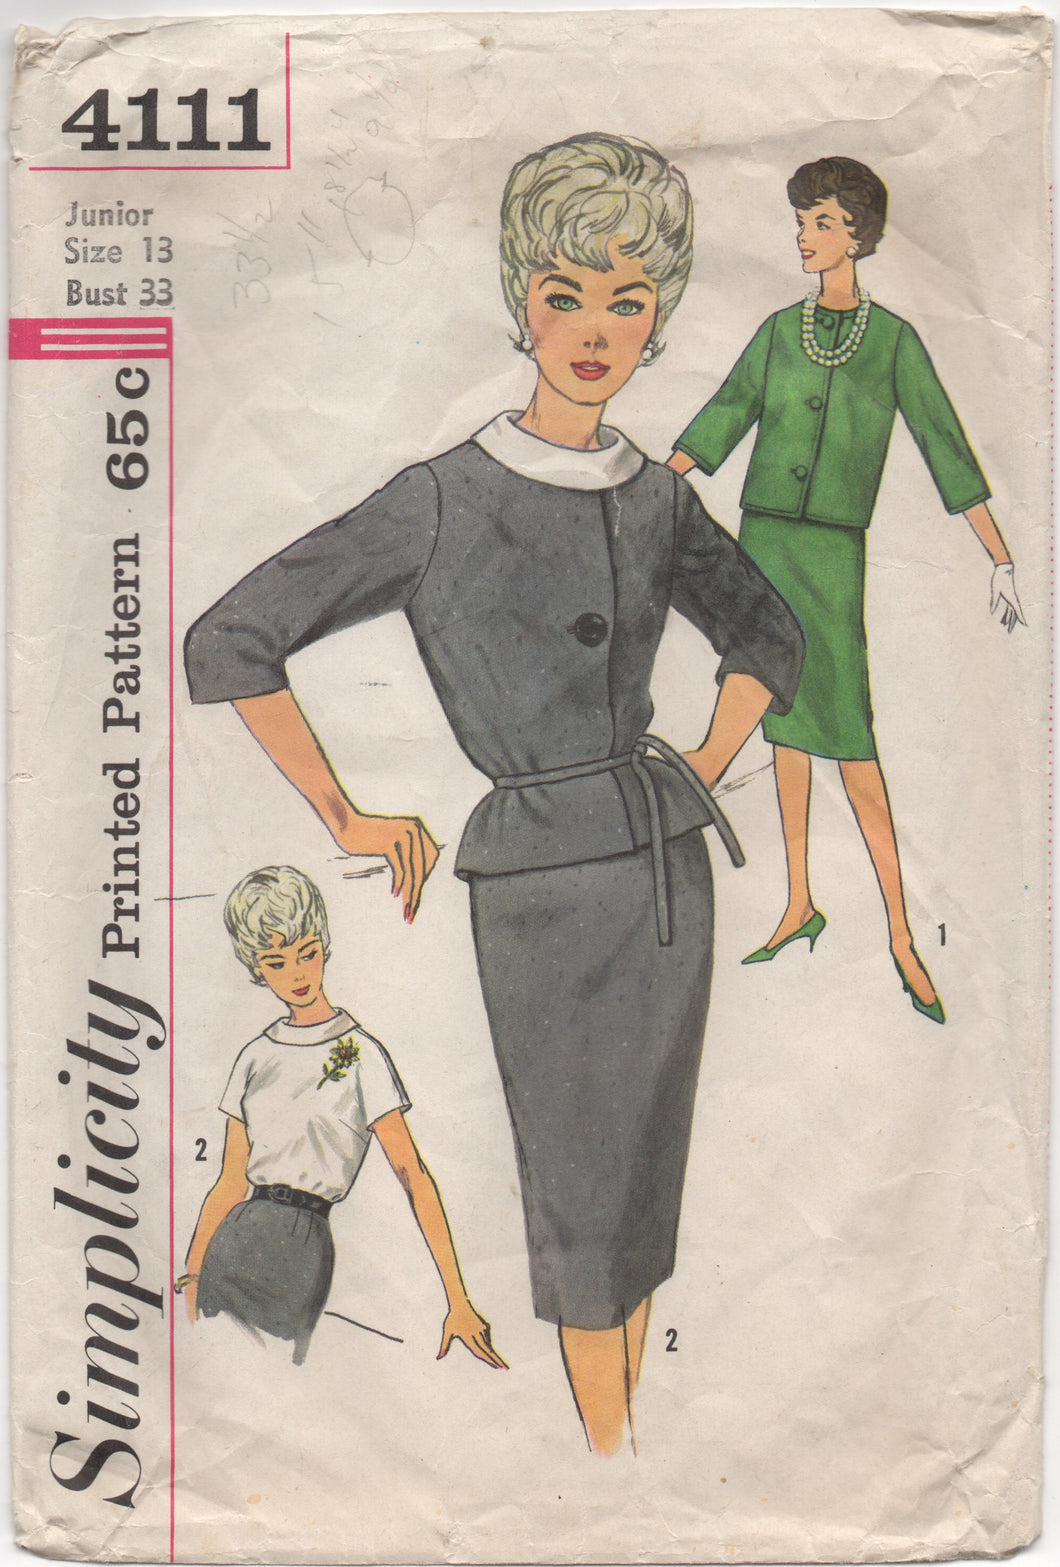 1960's Simplicity Suit Dress with Rolled Collar - Bust 33